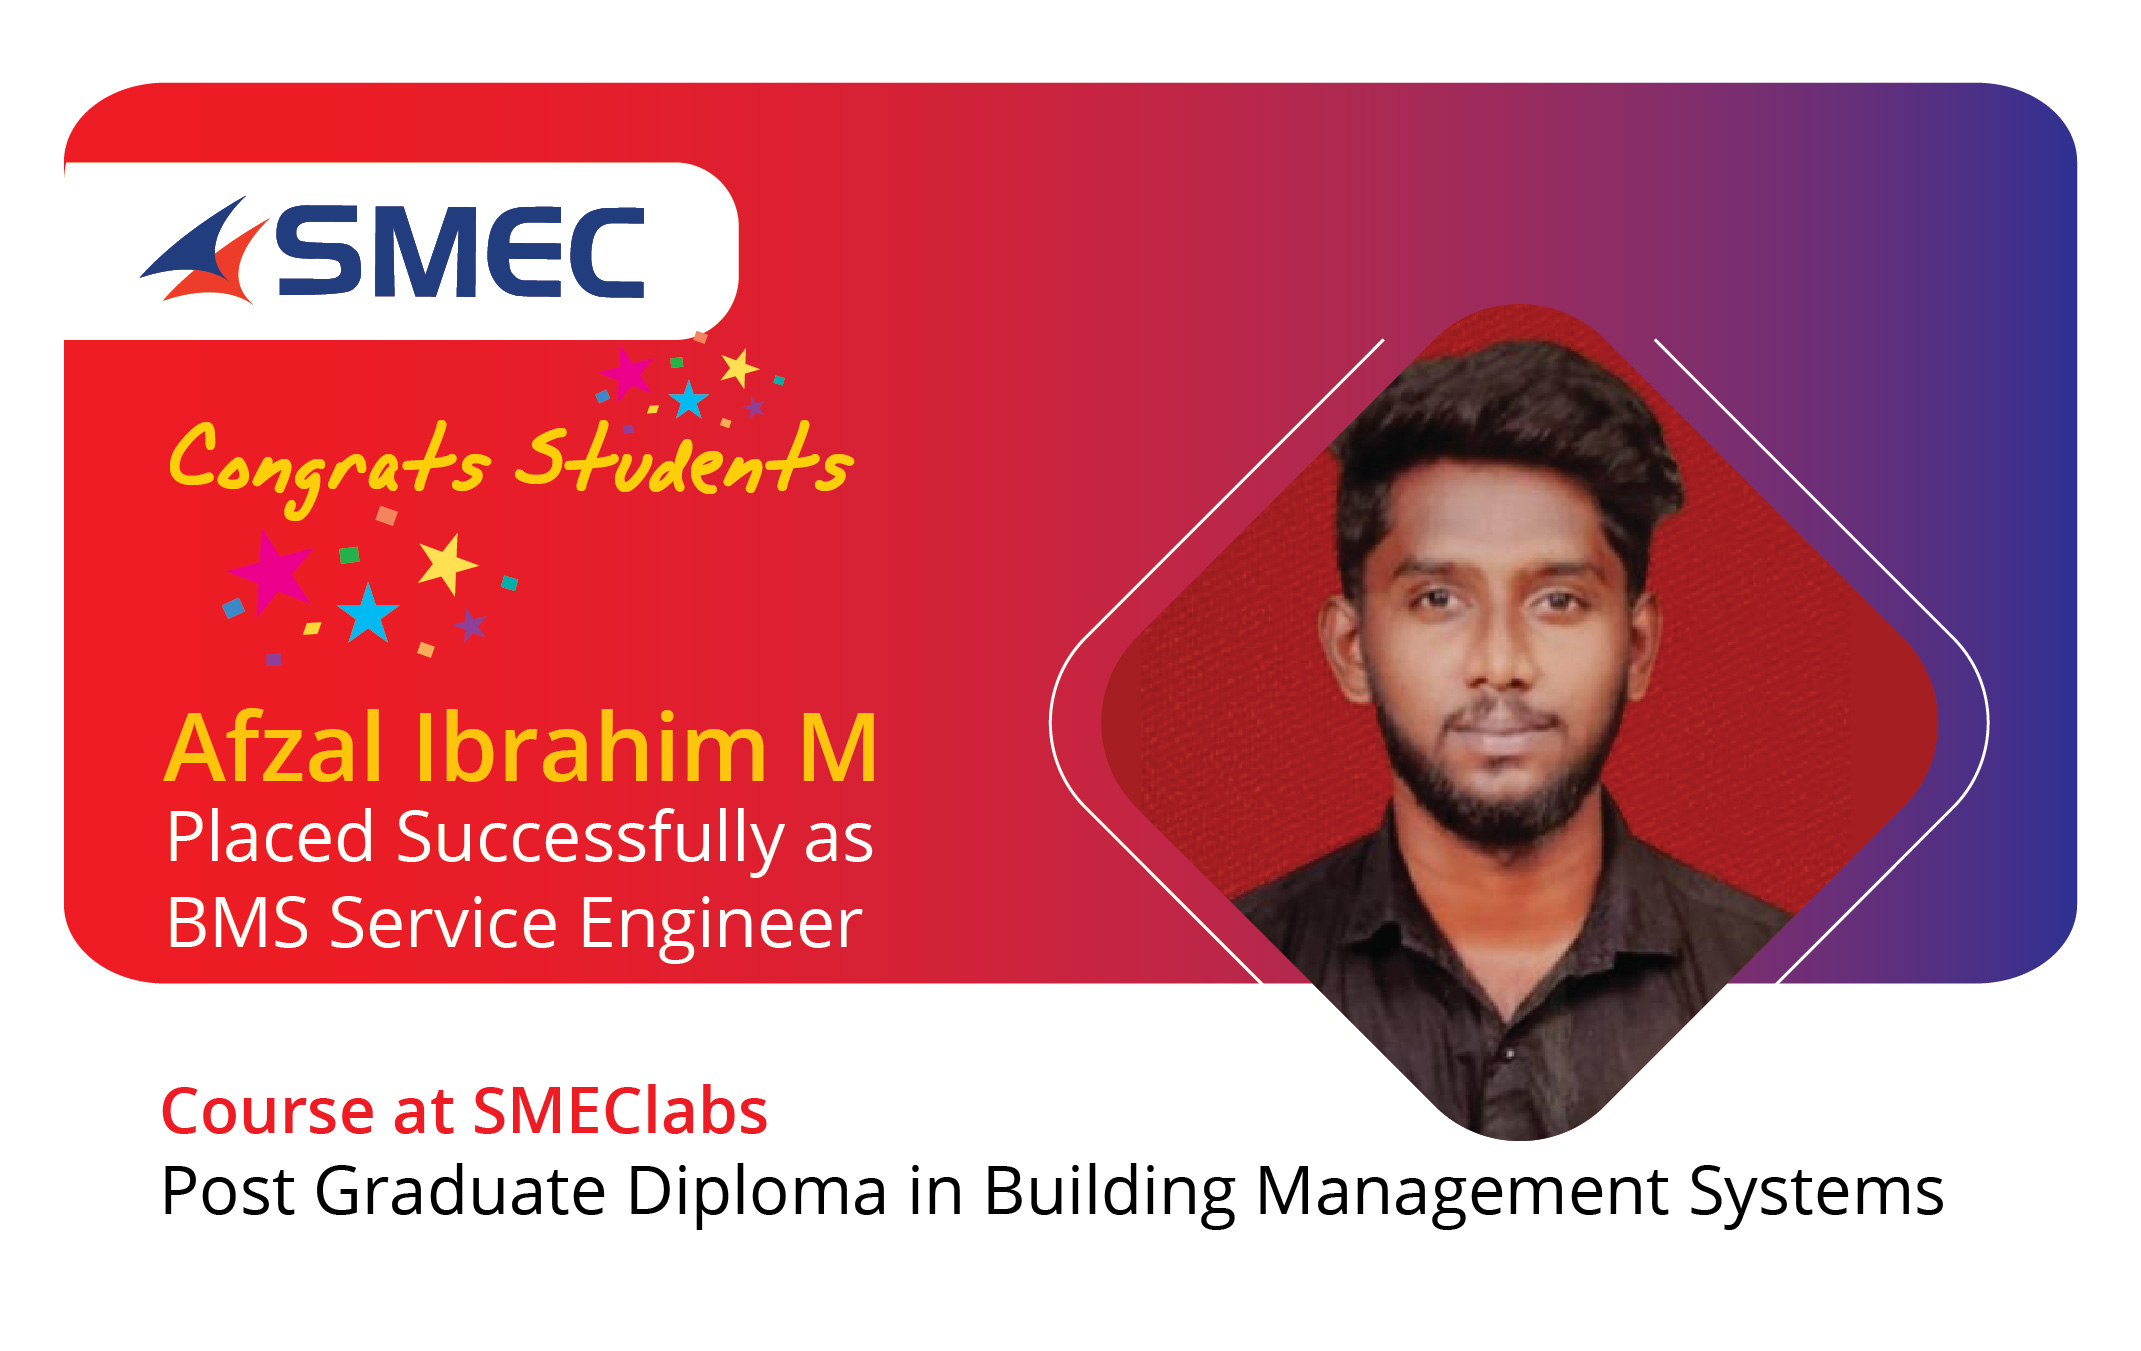 Afzal Ibrahim M placed successfully as BMS Service Engineer Congrats Afzal Ibrahim M To Join our Building Management systems please Click : https://www.smeclabs.com/bms-course/ #SMEC #SMEClabs #SMECJobs